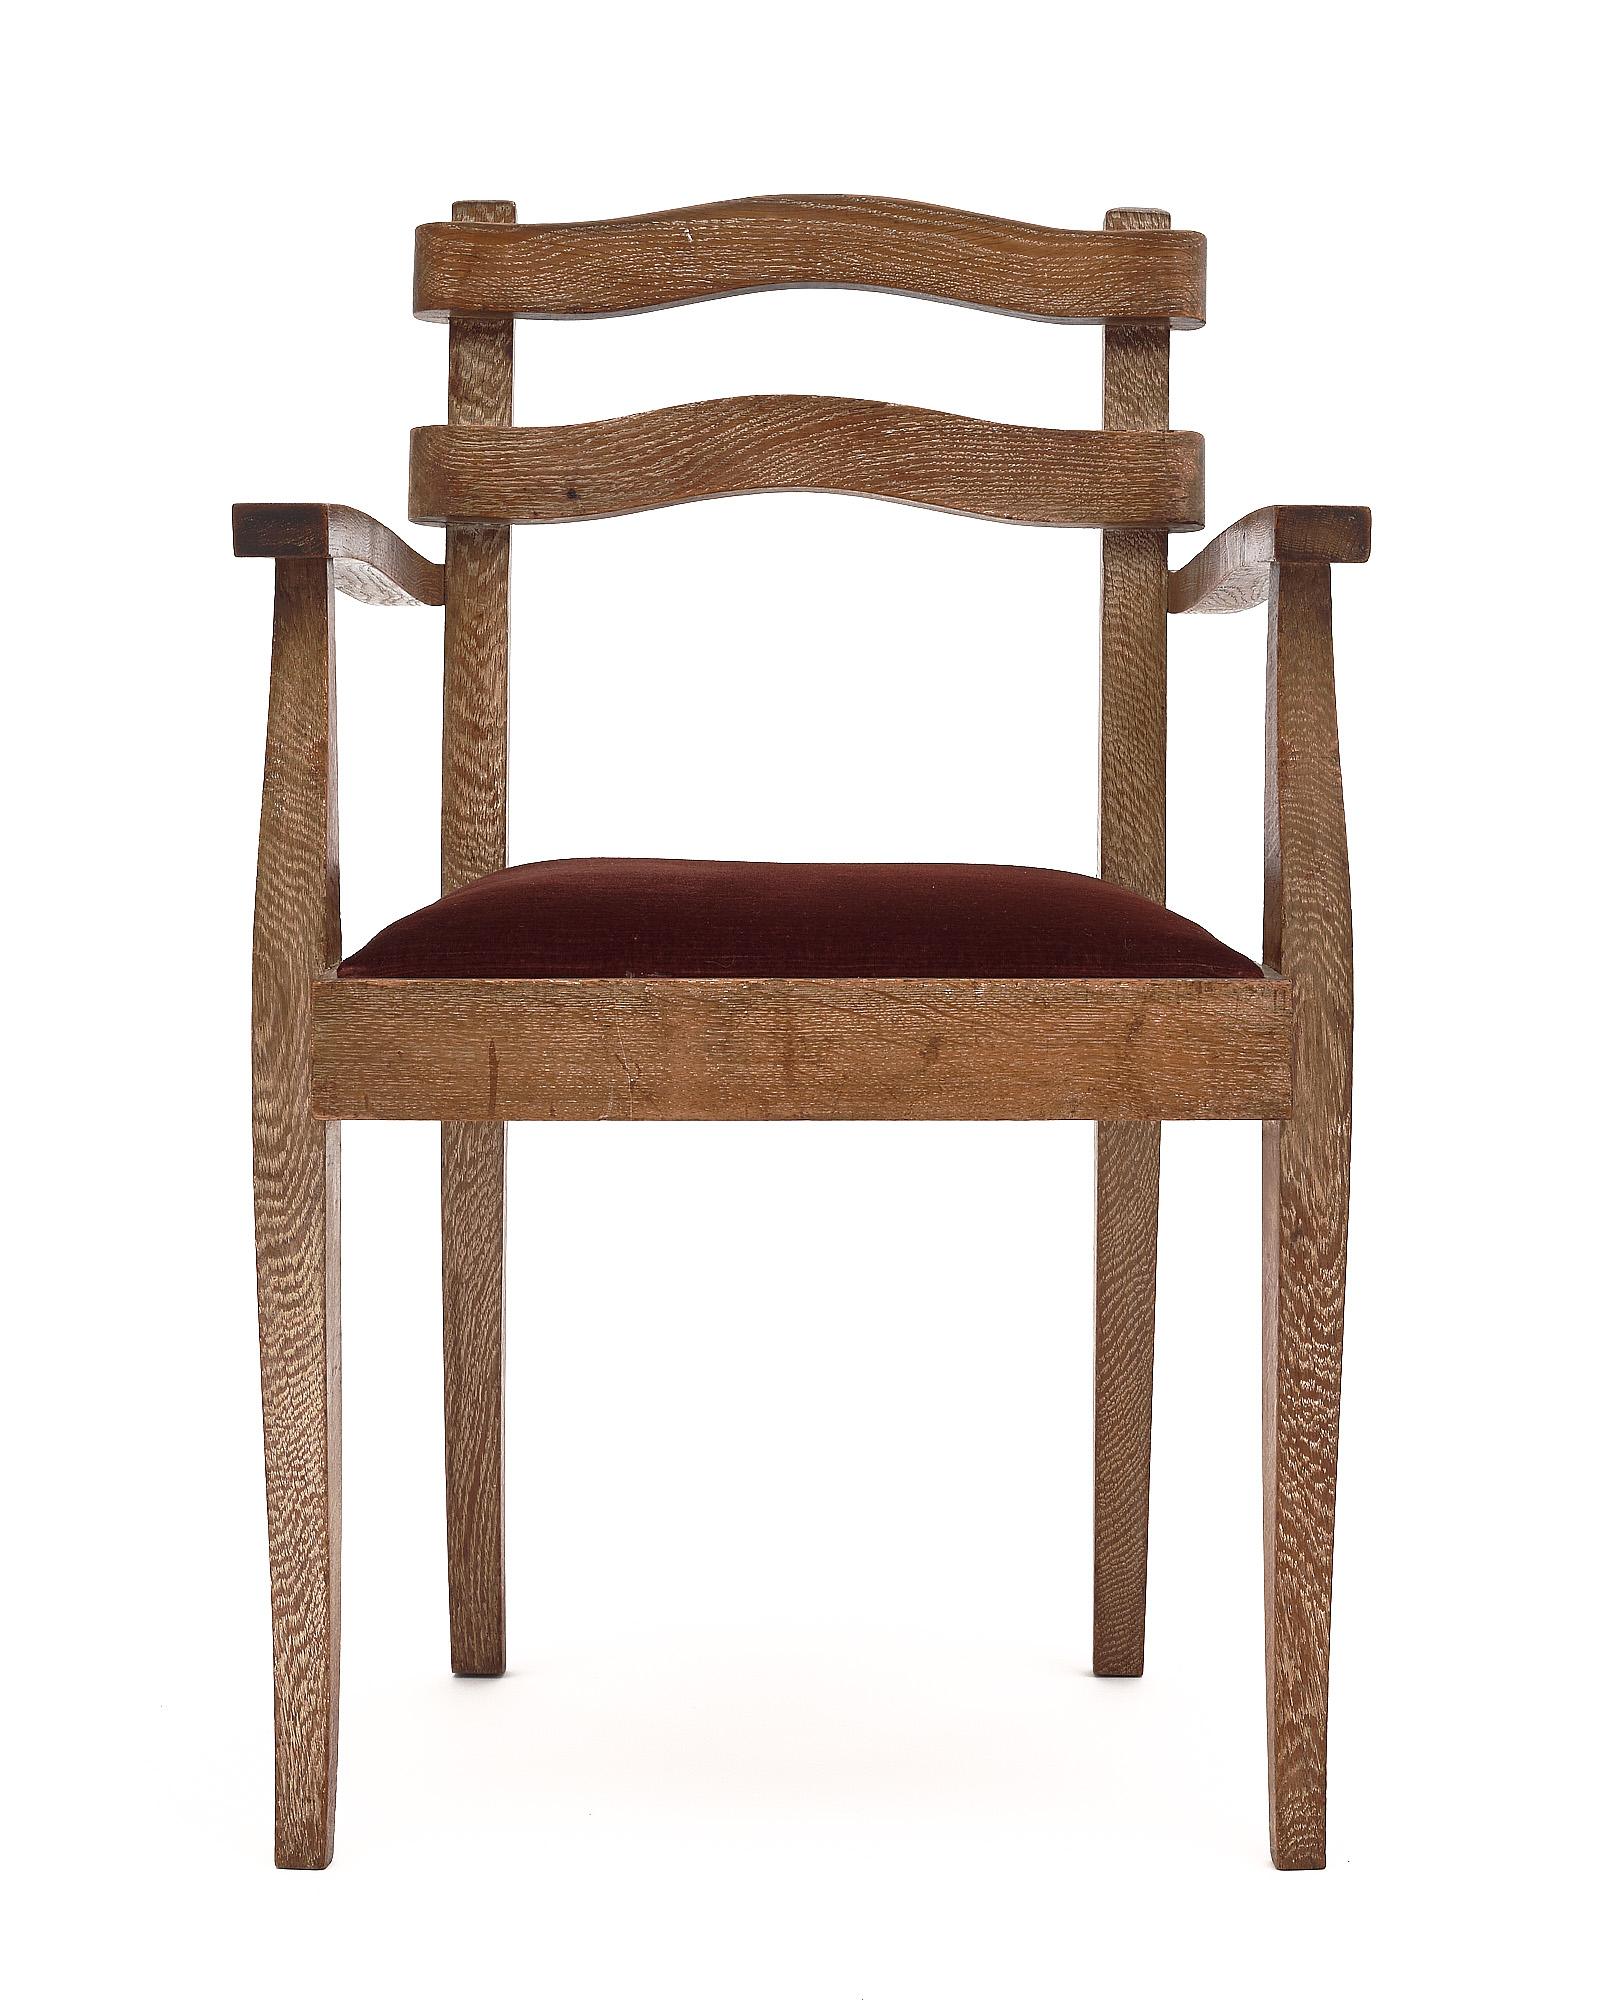 Set of five dining chairs with arms. These chairs are made of solid oak with a unique cerused finish to the wood. The seats are upholstered in the original burgundy colored velvet blend.